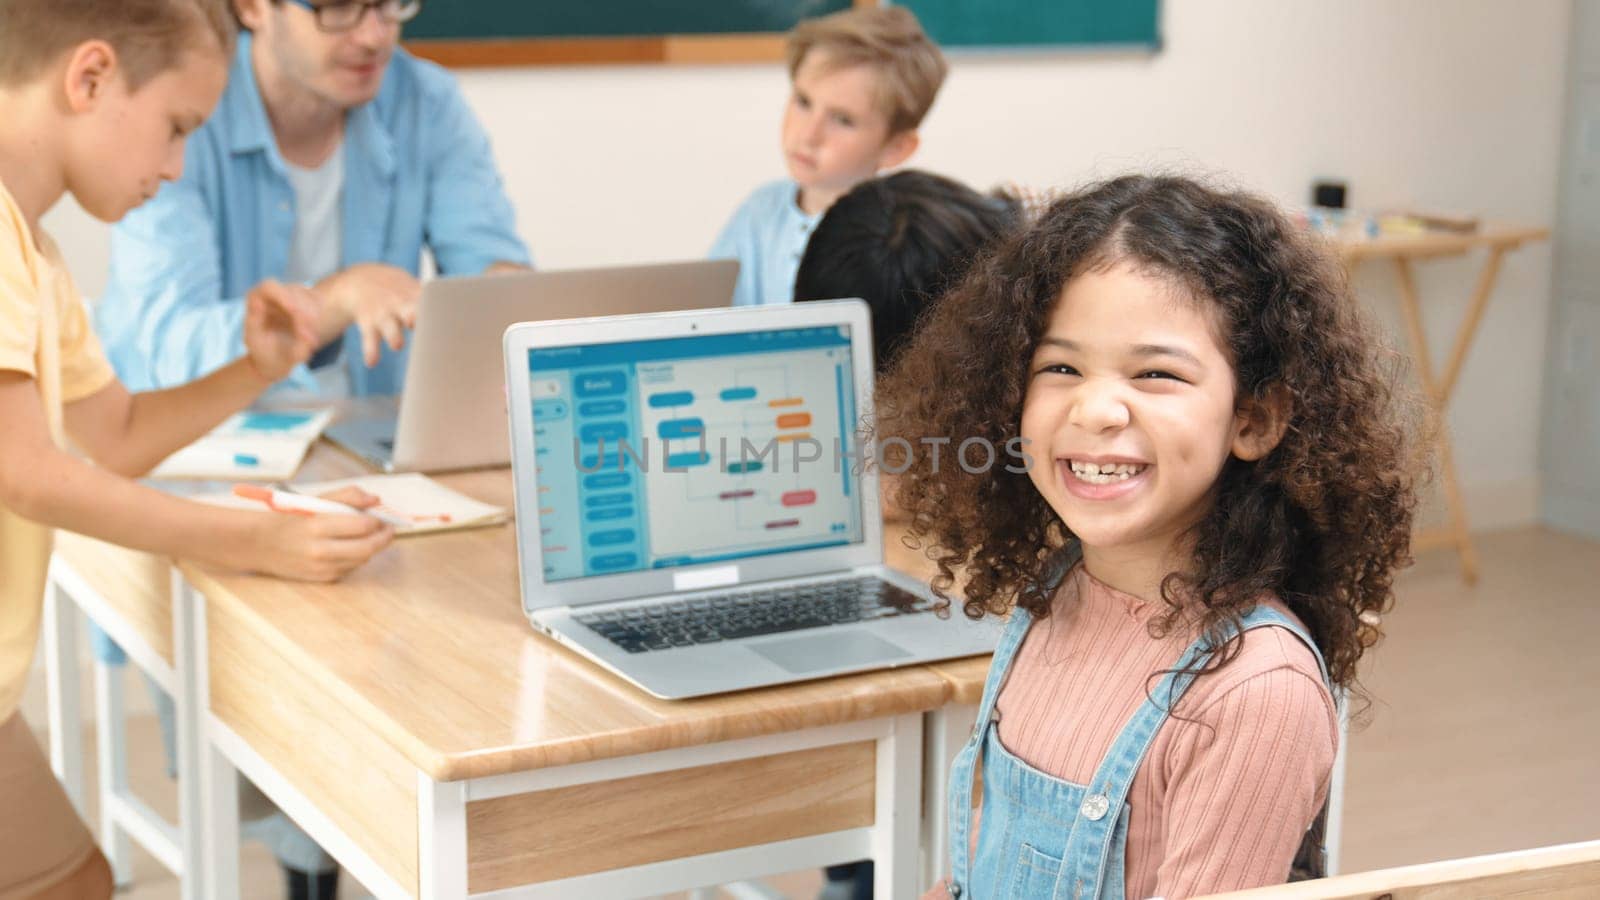 American student looking at camera and learning prompt in STEM technology class while group of diverse student and teacher doing mind mapping. Smart child learning coding software program. Pedagogy.